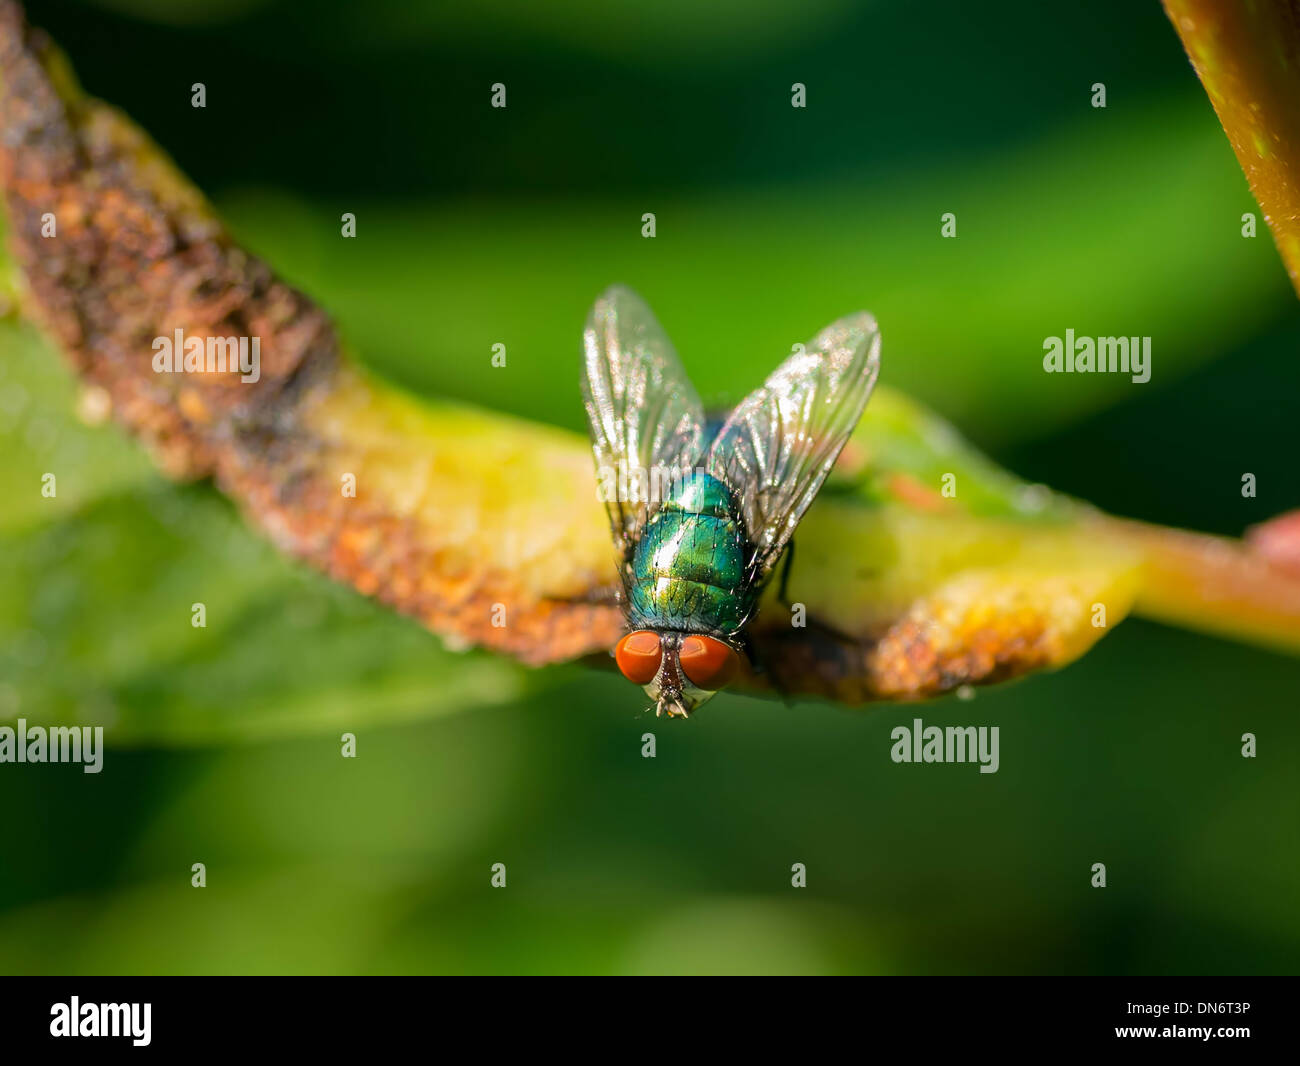 Green bottle fly on a decaying leaf Stock Photo